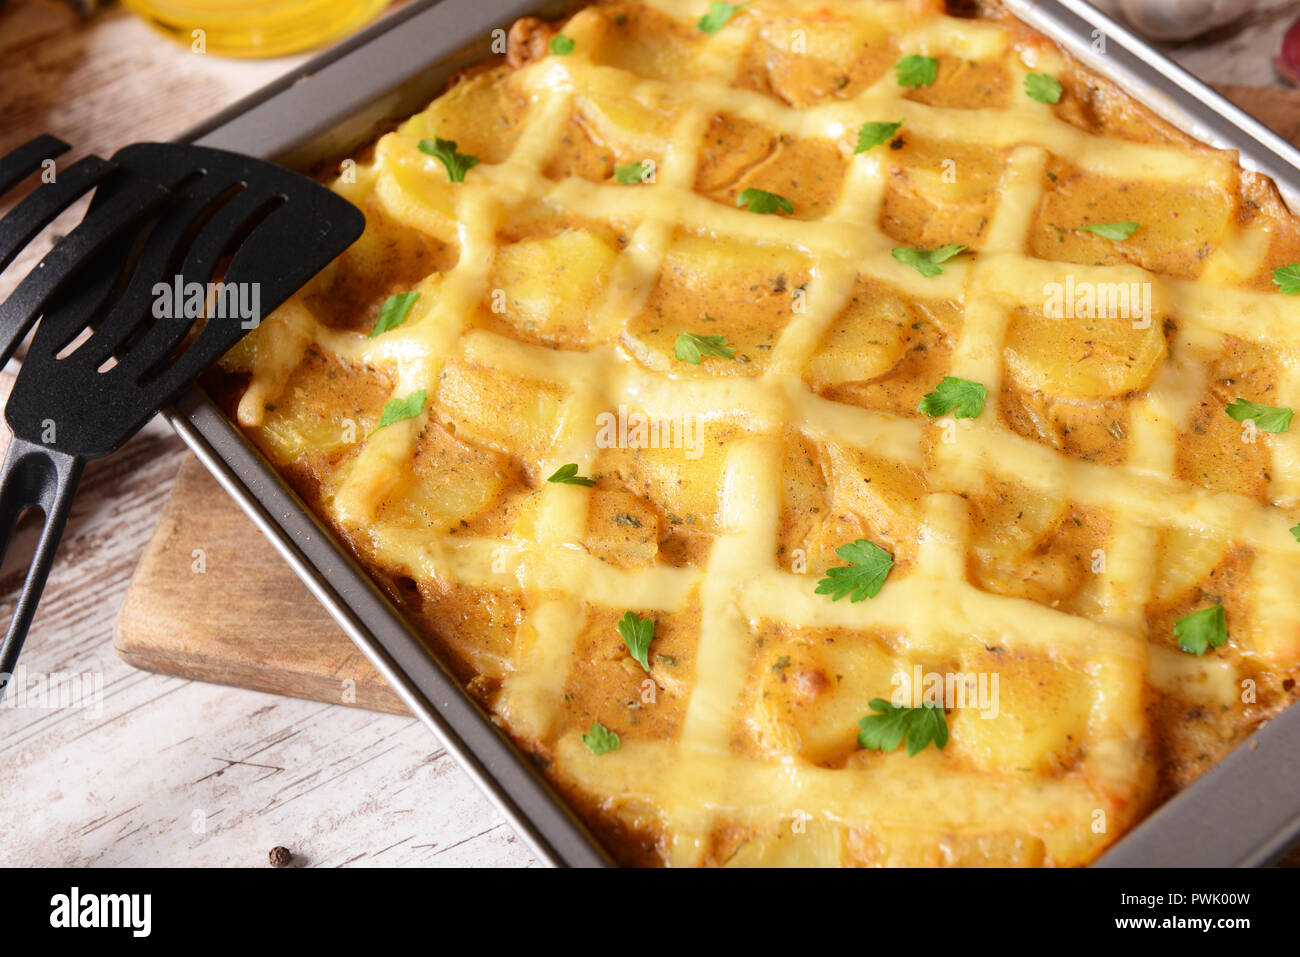 Casserole with potatoes, cheese and meat Stock Photo